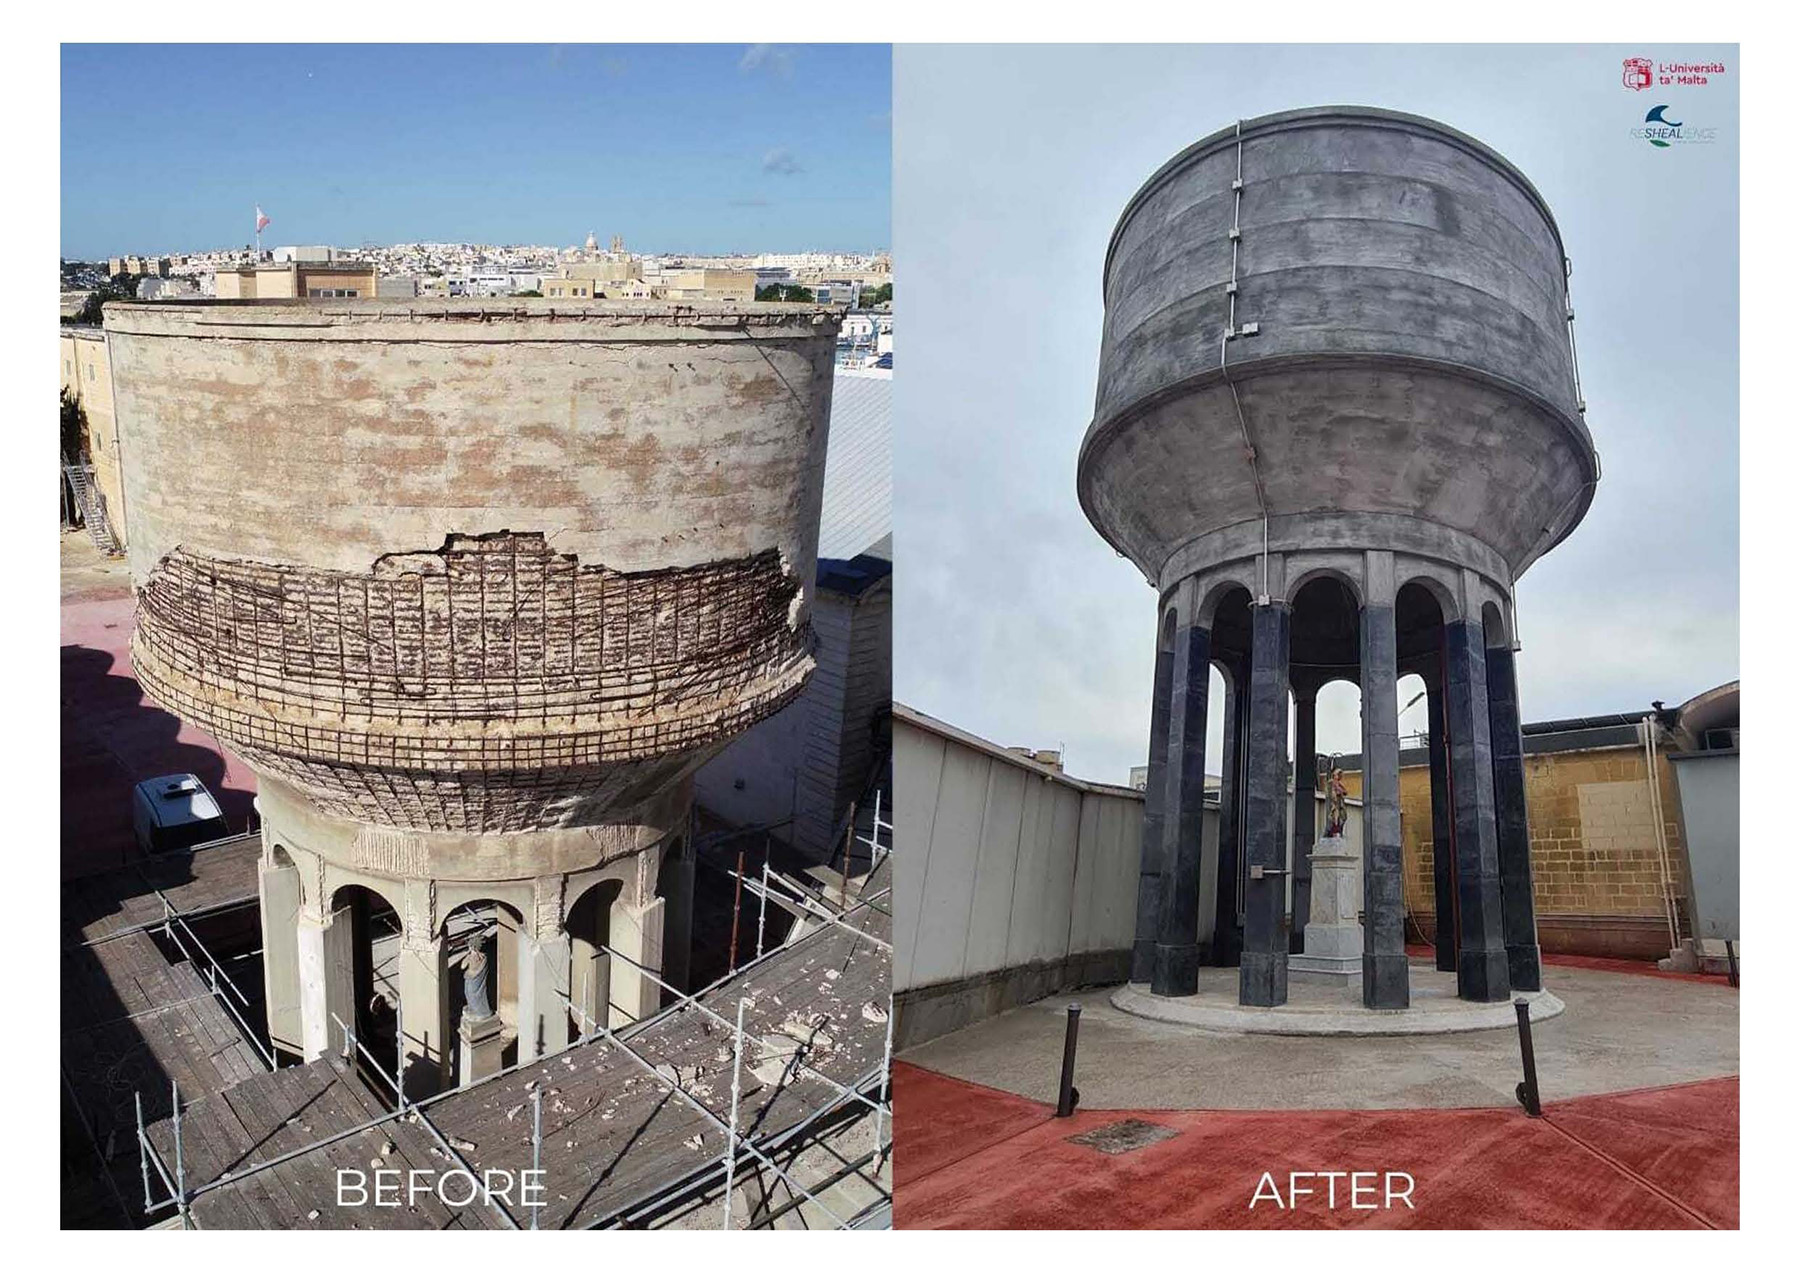 The Water Tower conservation project at the Public Abbatoir in Marsa took advantage of UHDC materials when it was reopened earlier this year. Built in the late 19th century, the landmark water tower was one of the first concrete structures in Malta, but had been slated for demolition because of its run-down condition. Researchers at the University of Malta were able to head that off by using the new advanced concrete, which is much stronger than average. With 12 columns and a religious statue underneath, the water tower is the height of a five story building and has been saved for use.